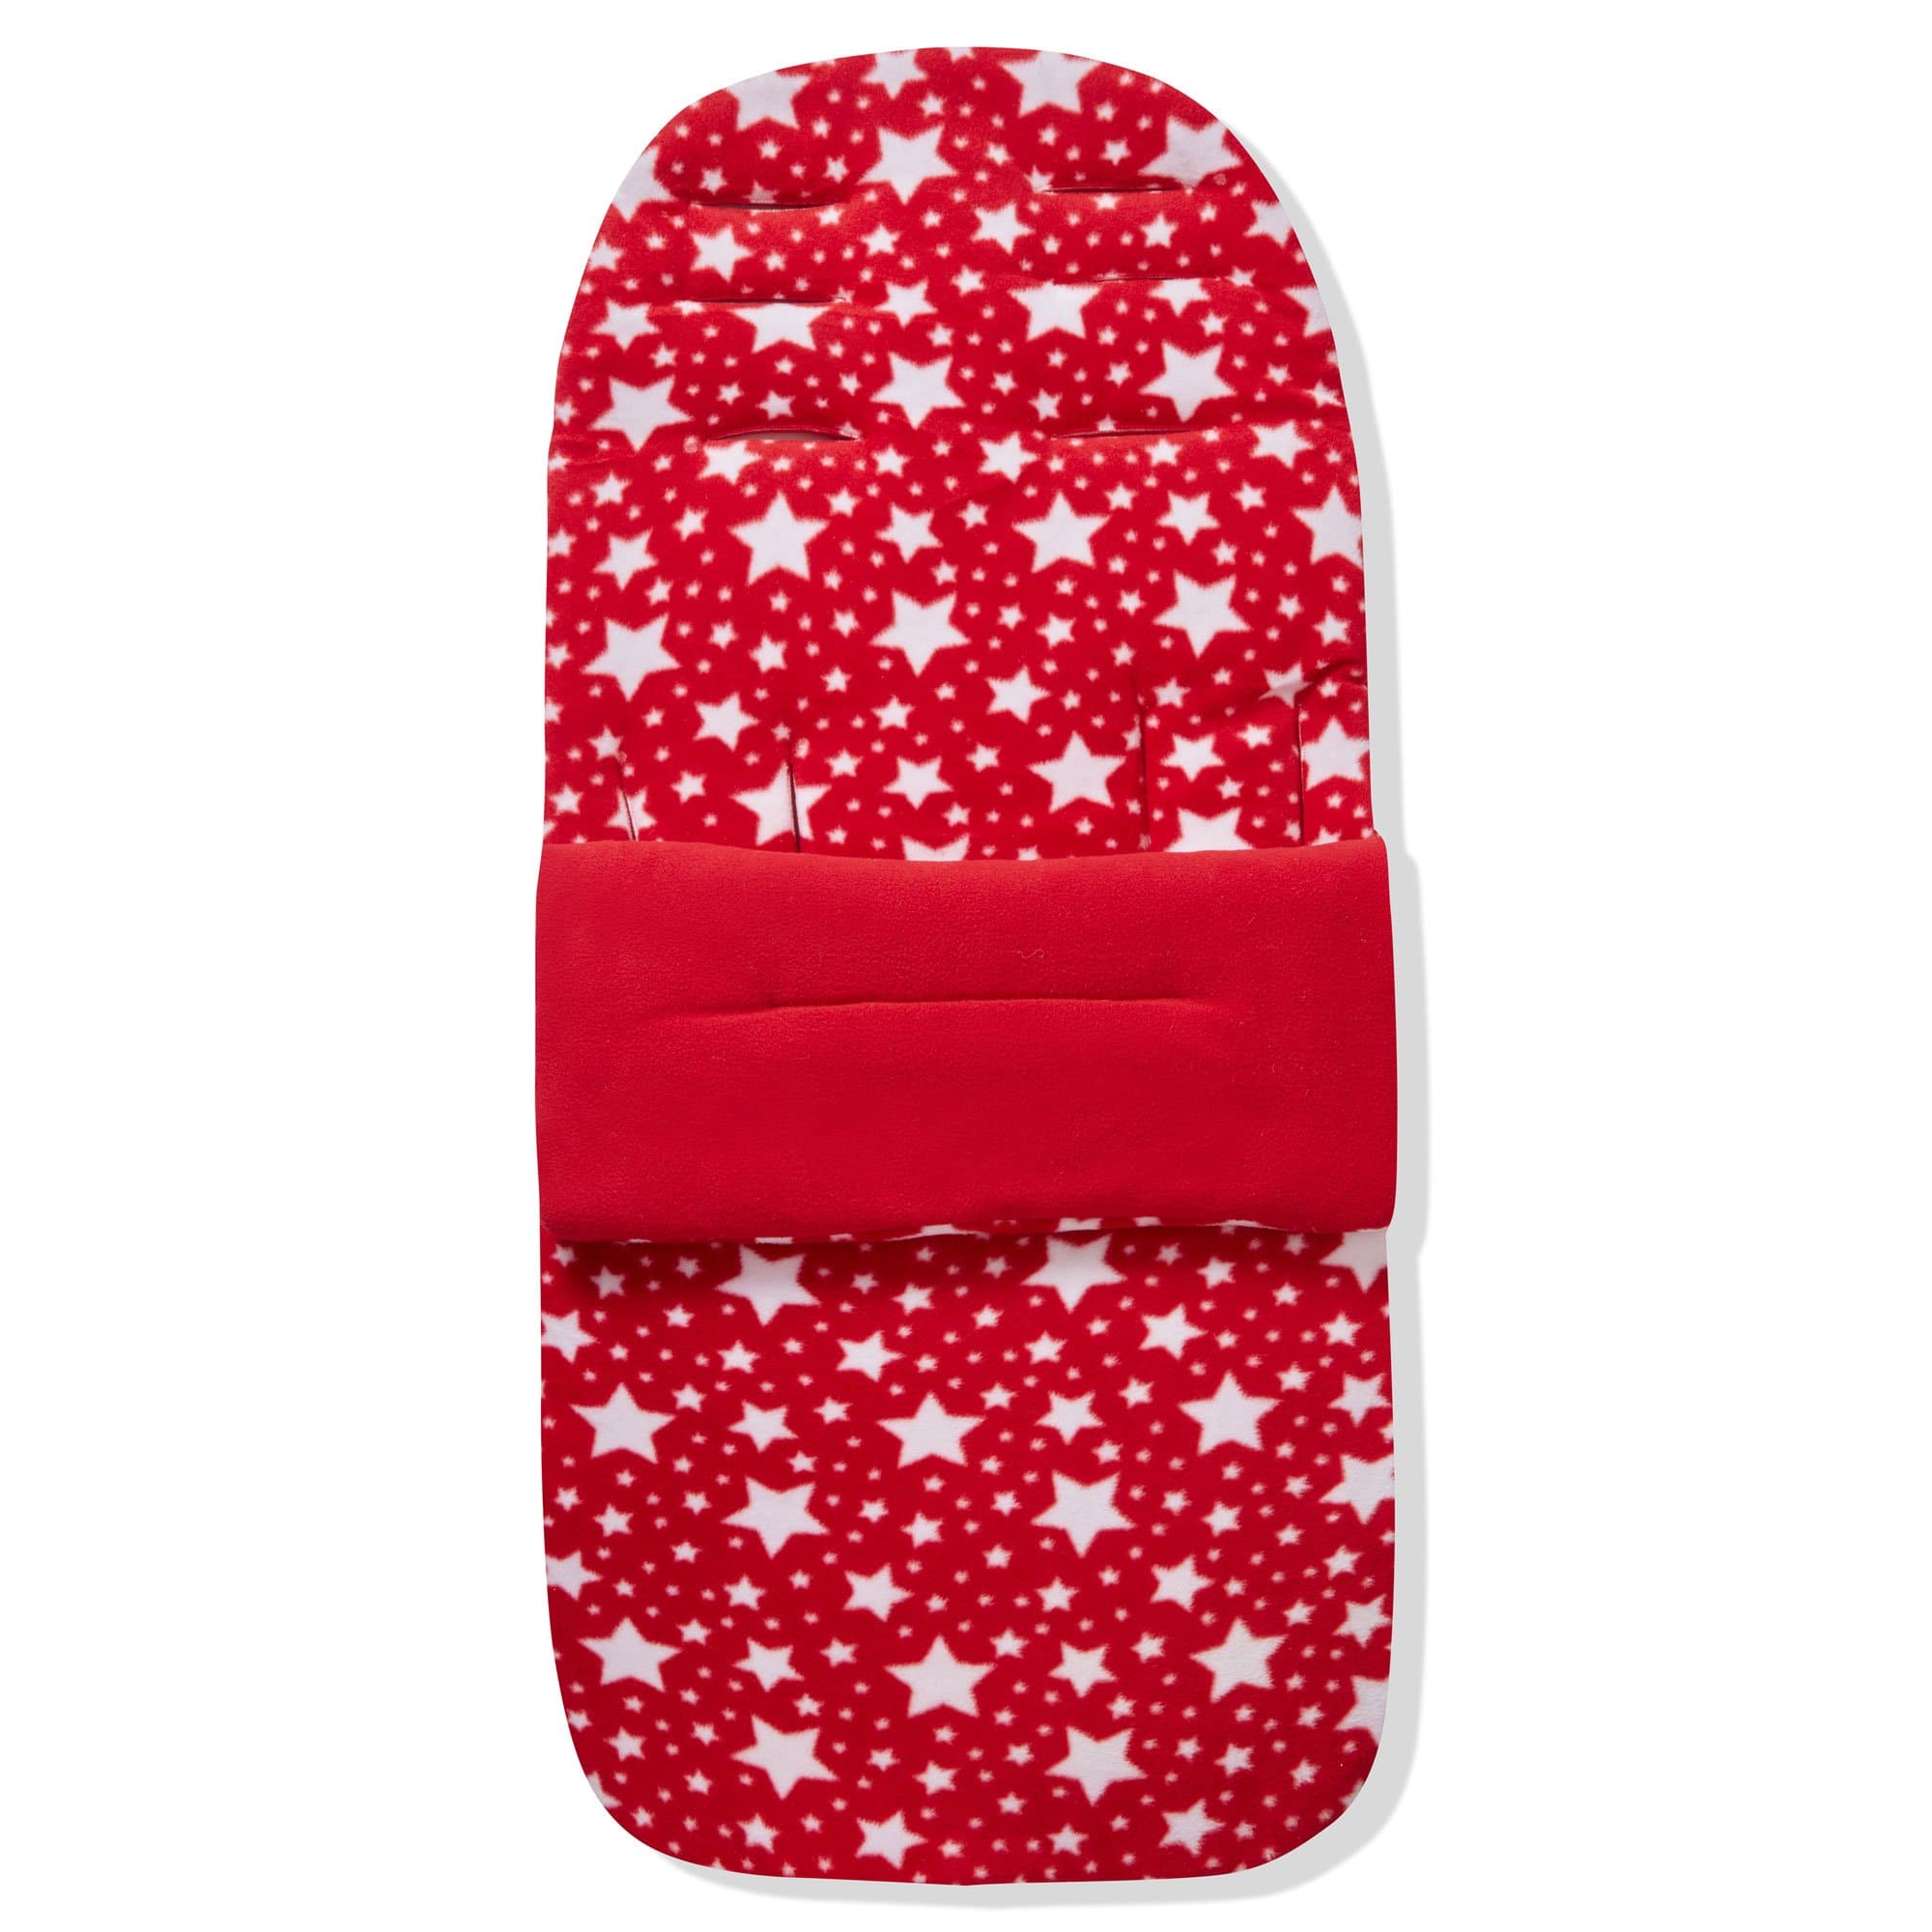 Fleece Footmuff / Cosy Toes Compatible with Obaby - Red Star / Fits All Models | For Your Little One